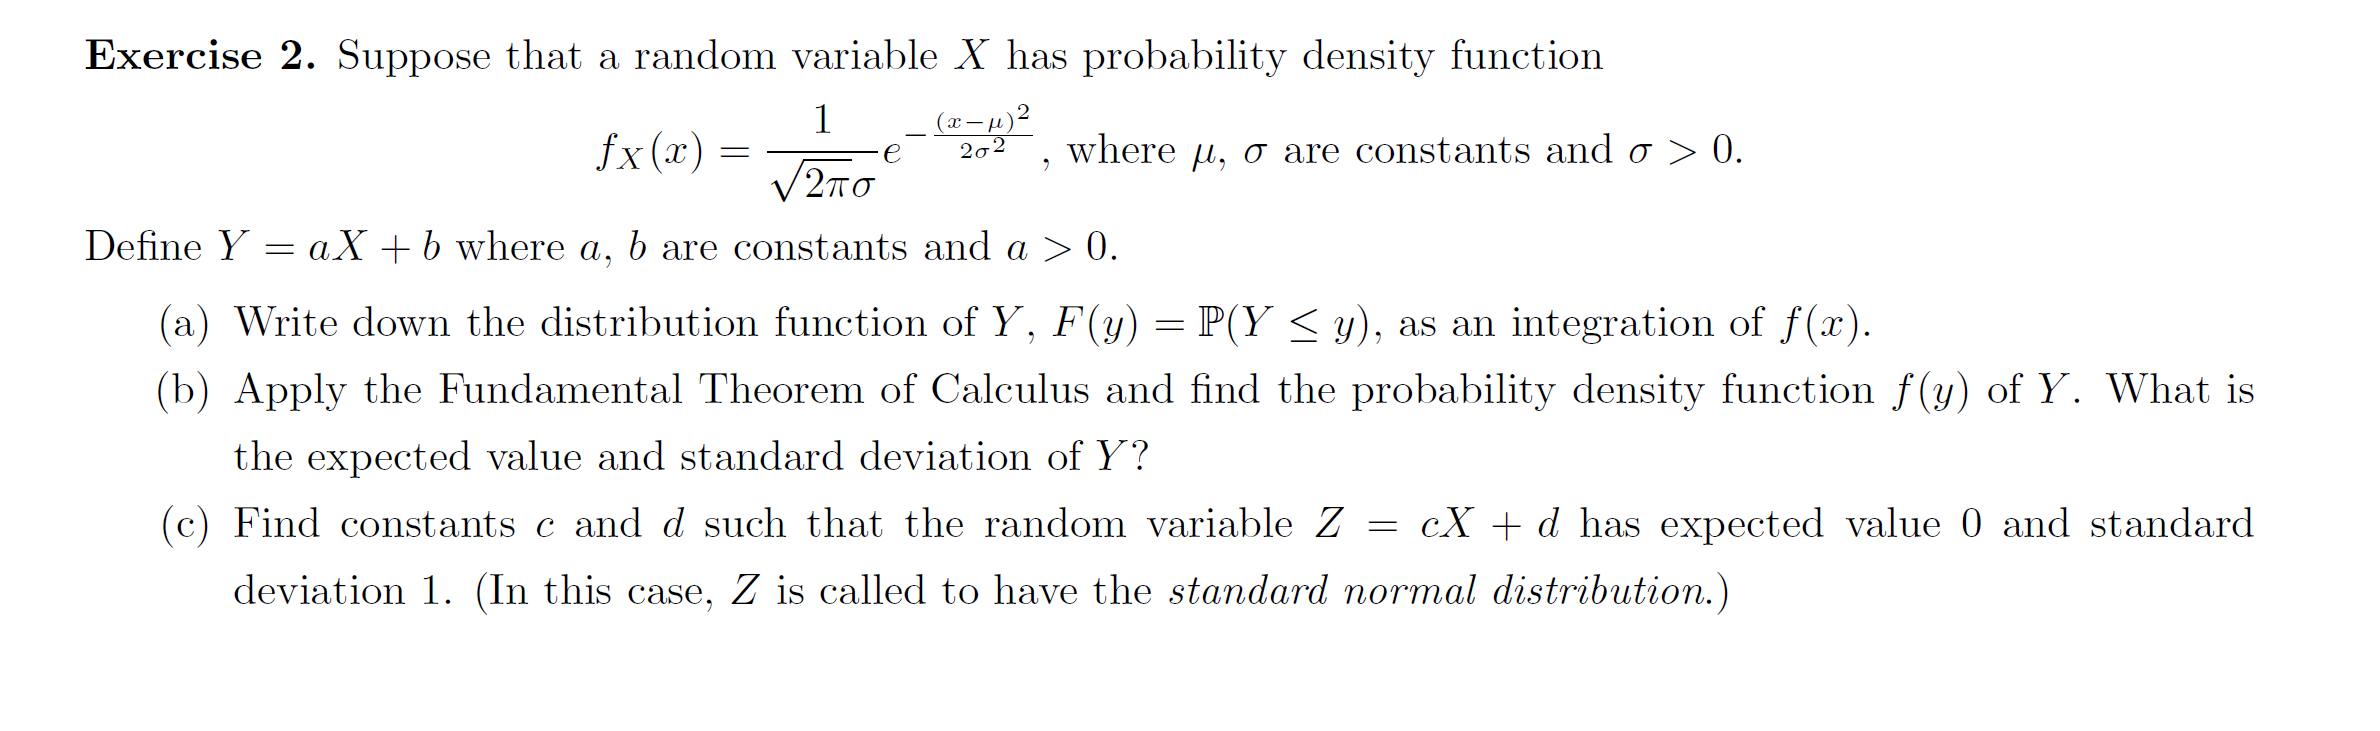 Solved Exercise \#2: Suppose we have a random variable X